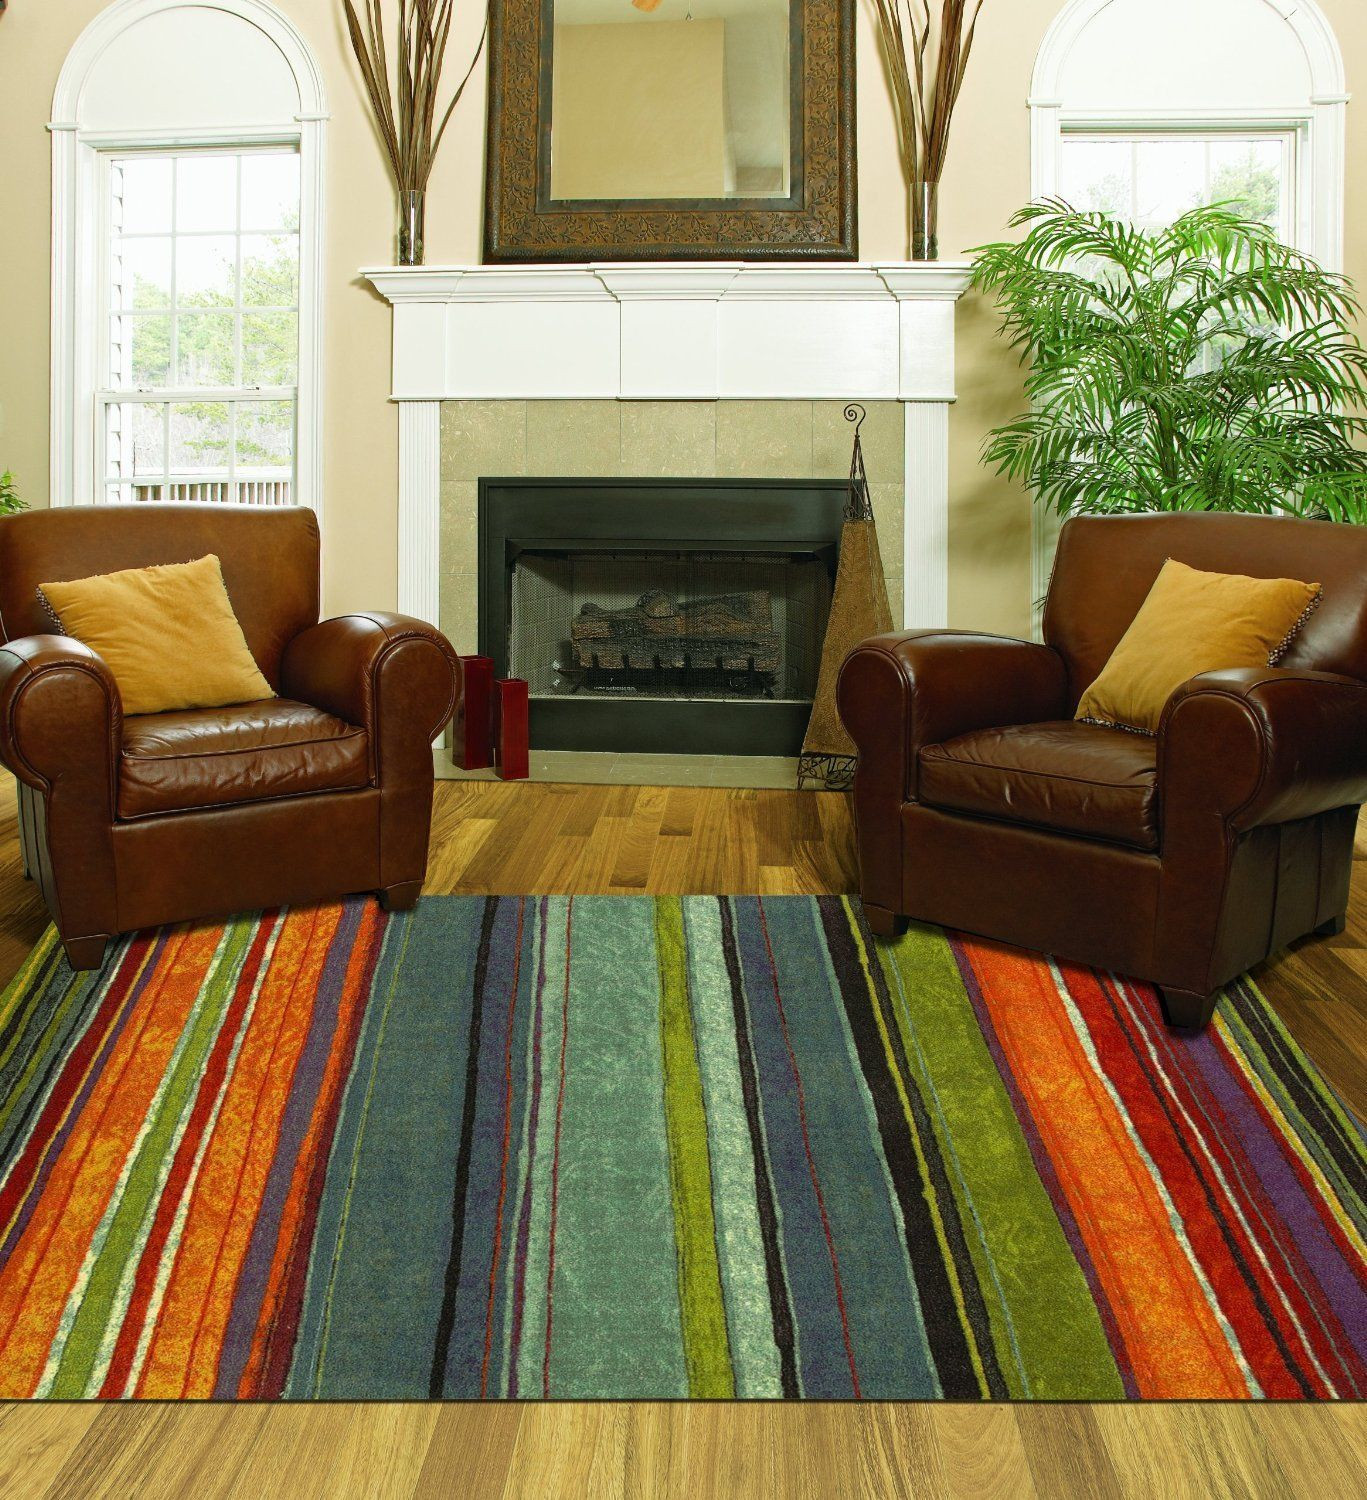 Big Rugs For Living Room
 Area Rug Colorful 8x10 Living Room Size Carpet Home